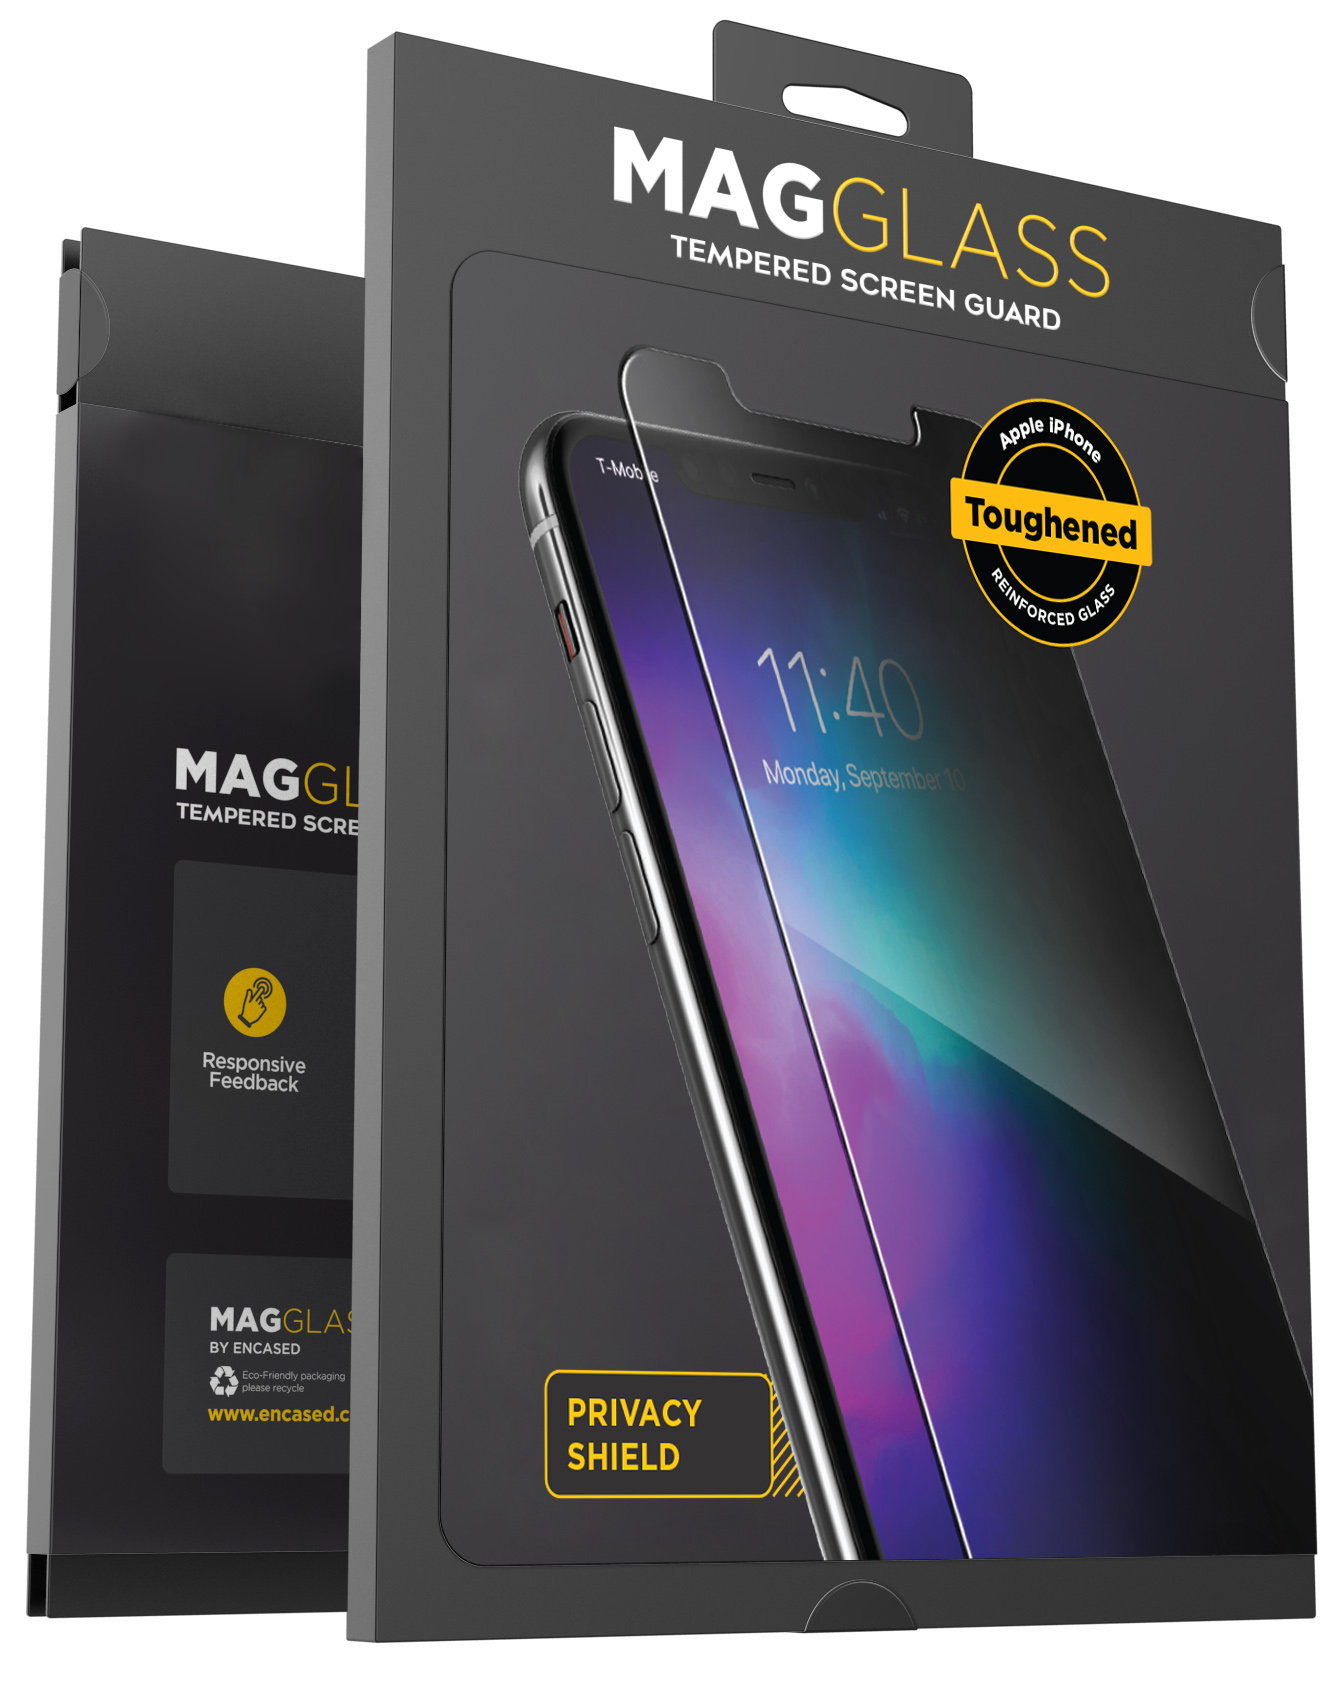 Magglass iPhone 11 Pro Privacy Screen Protector - Anti Spy Fingerprint Resistant Tempered Glass Display Guard (Case compatible)